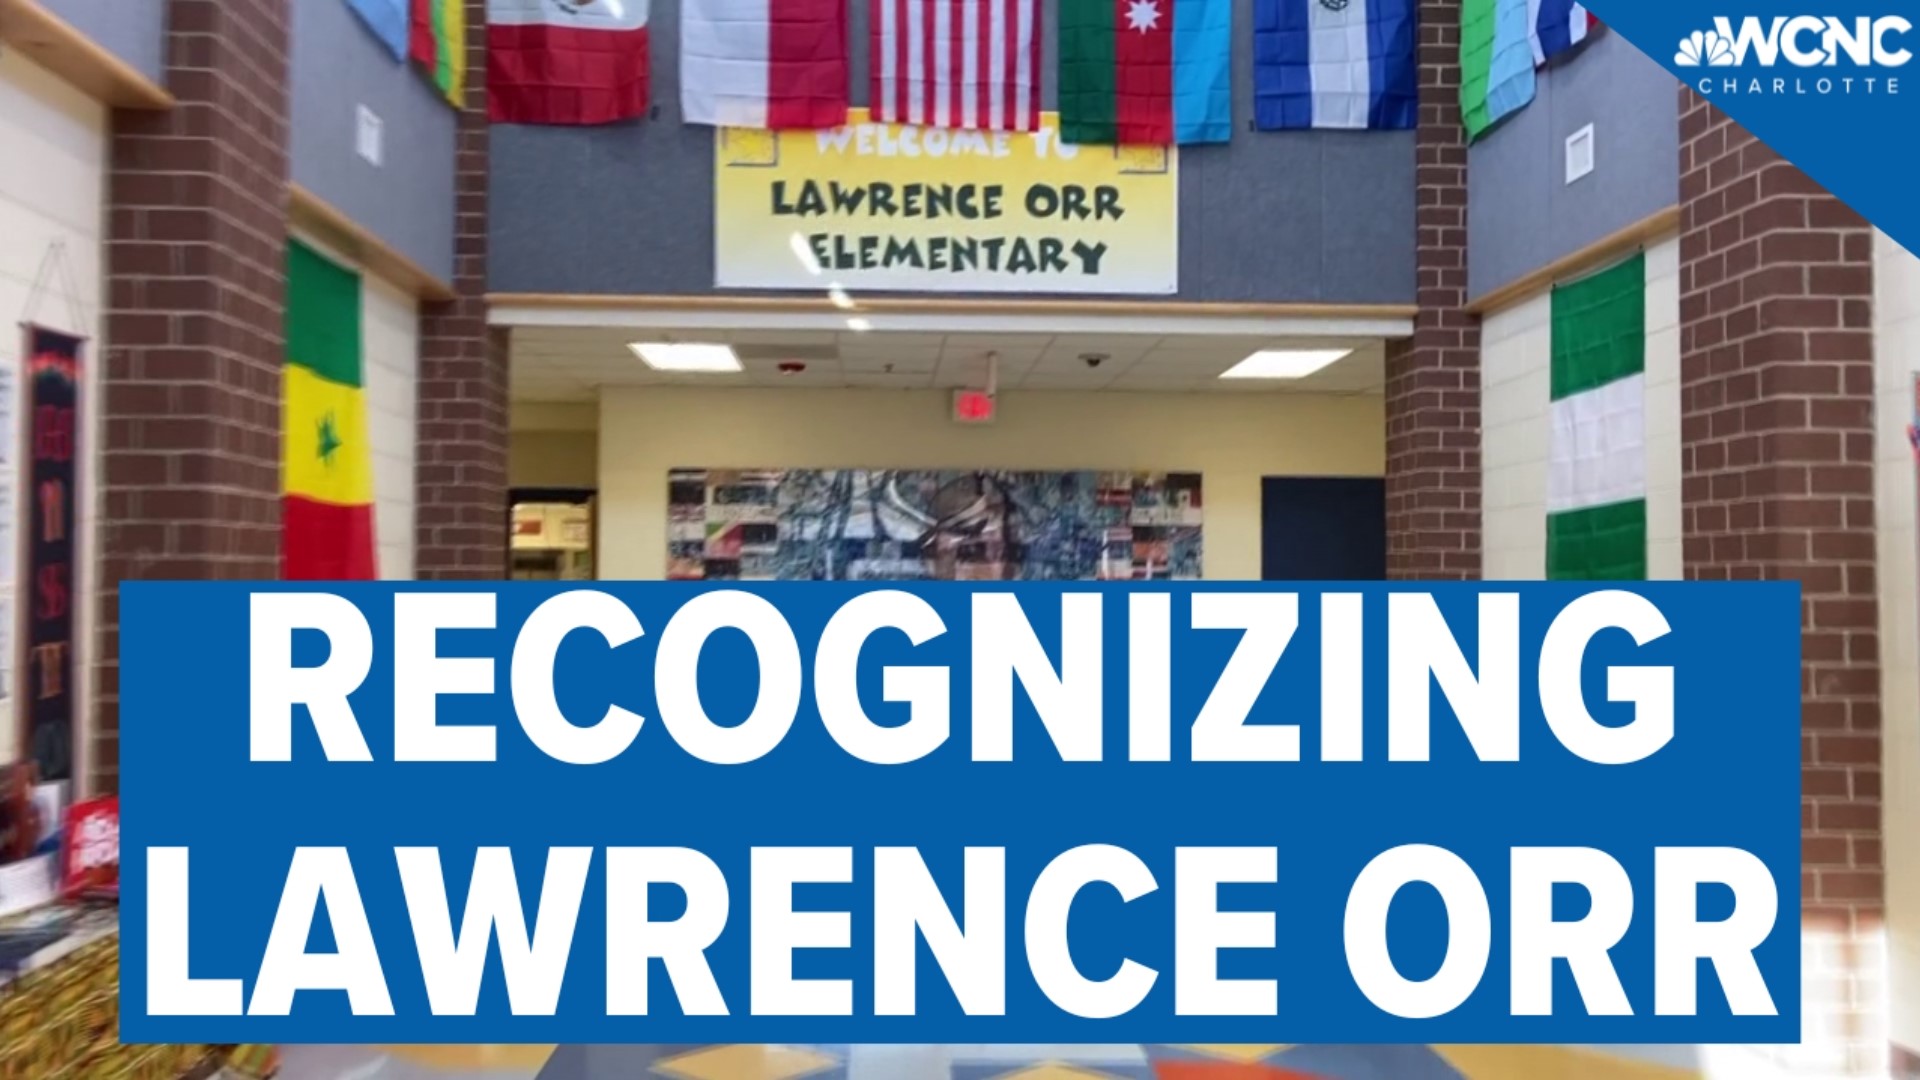 Lawrence Orr helped shape access to education for students in the Charlotte area.